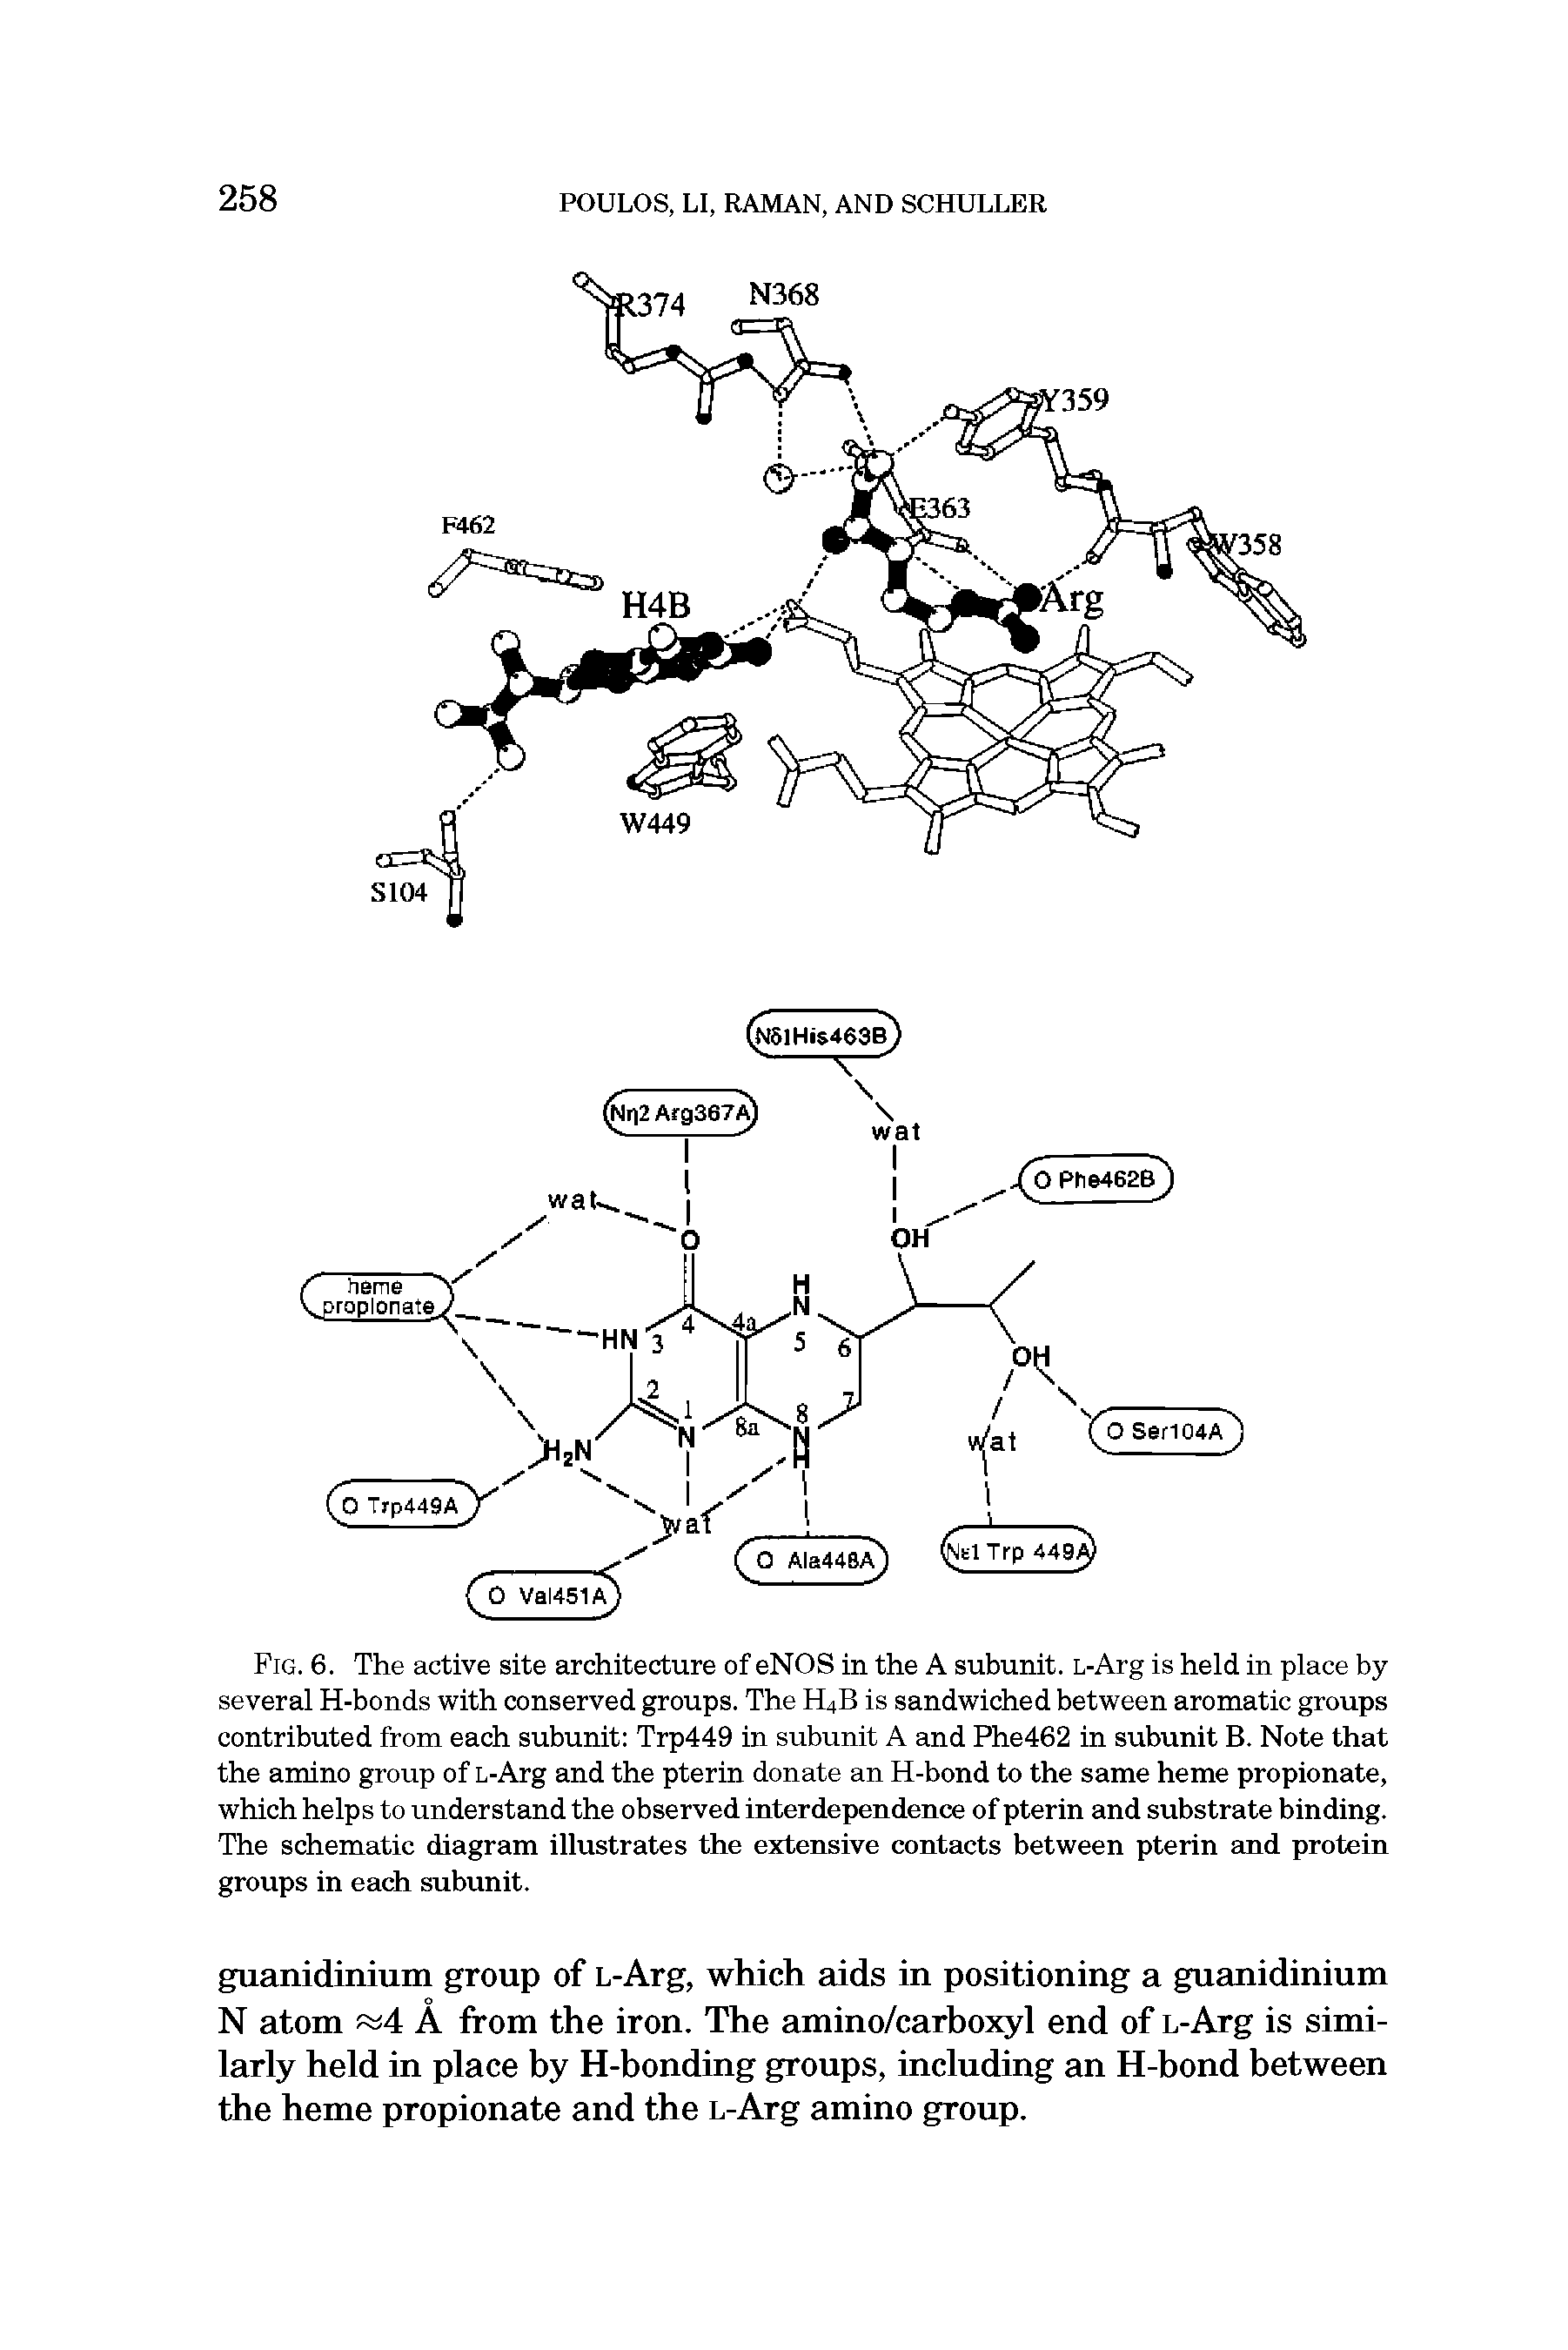 Fig. 6. The active site architecture of eNOS in the A subunit. L-Arg is held in place by several H-bonds with conserved groups. The H4B is sandwiched between aromatic groups contributed from each subunit Trp449 in subunit A and Phe462 in subunit B. Note that the amino group of L-Arg and the pterin donate an H-bond to the same heme propionate, which helps to understand the observed interdependence of pterin and substrate binding. The schematic diagram illustrates the extensive contacts between pterin and protein groups in each subunit.